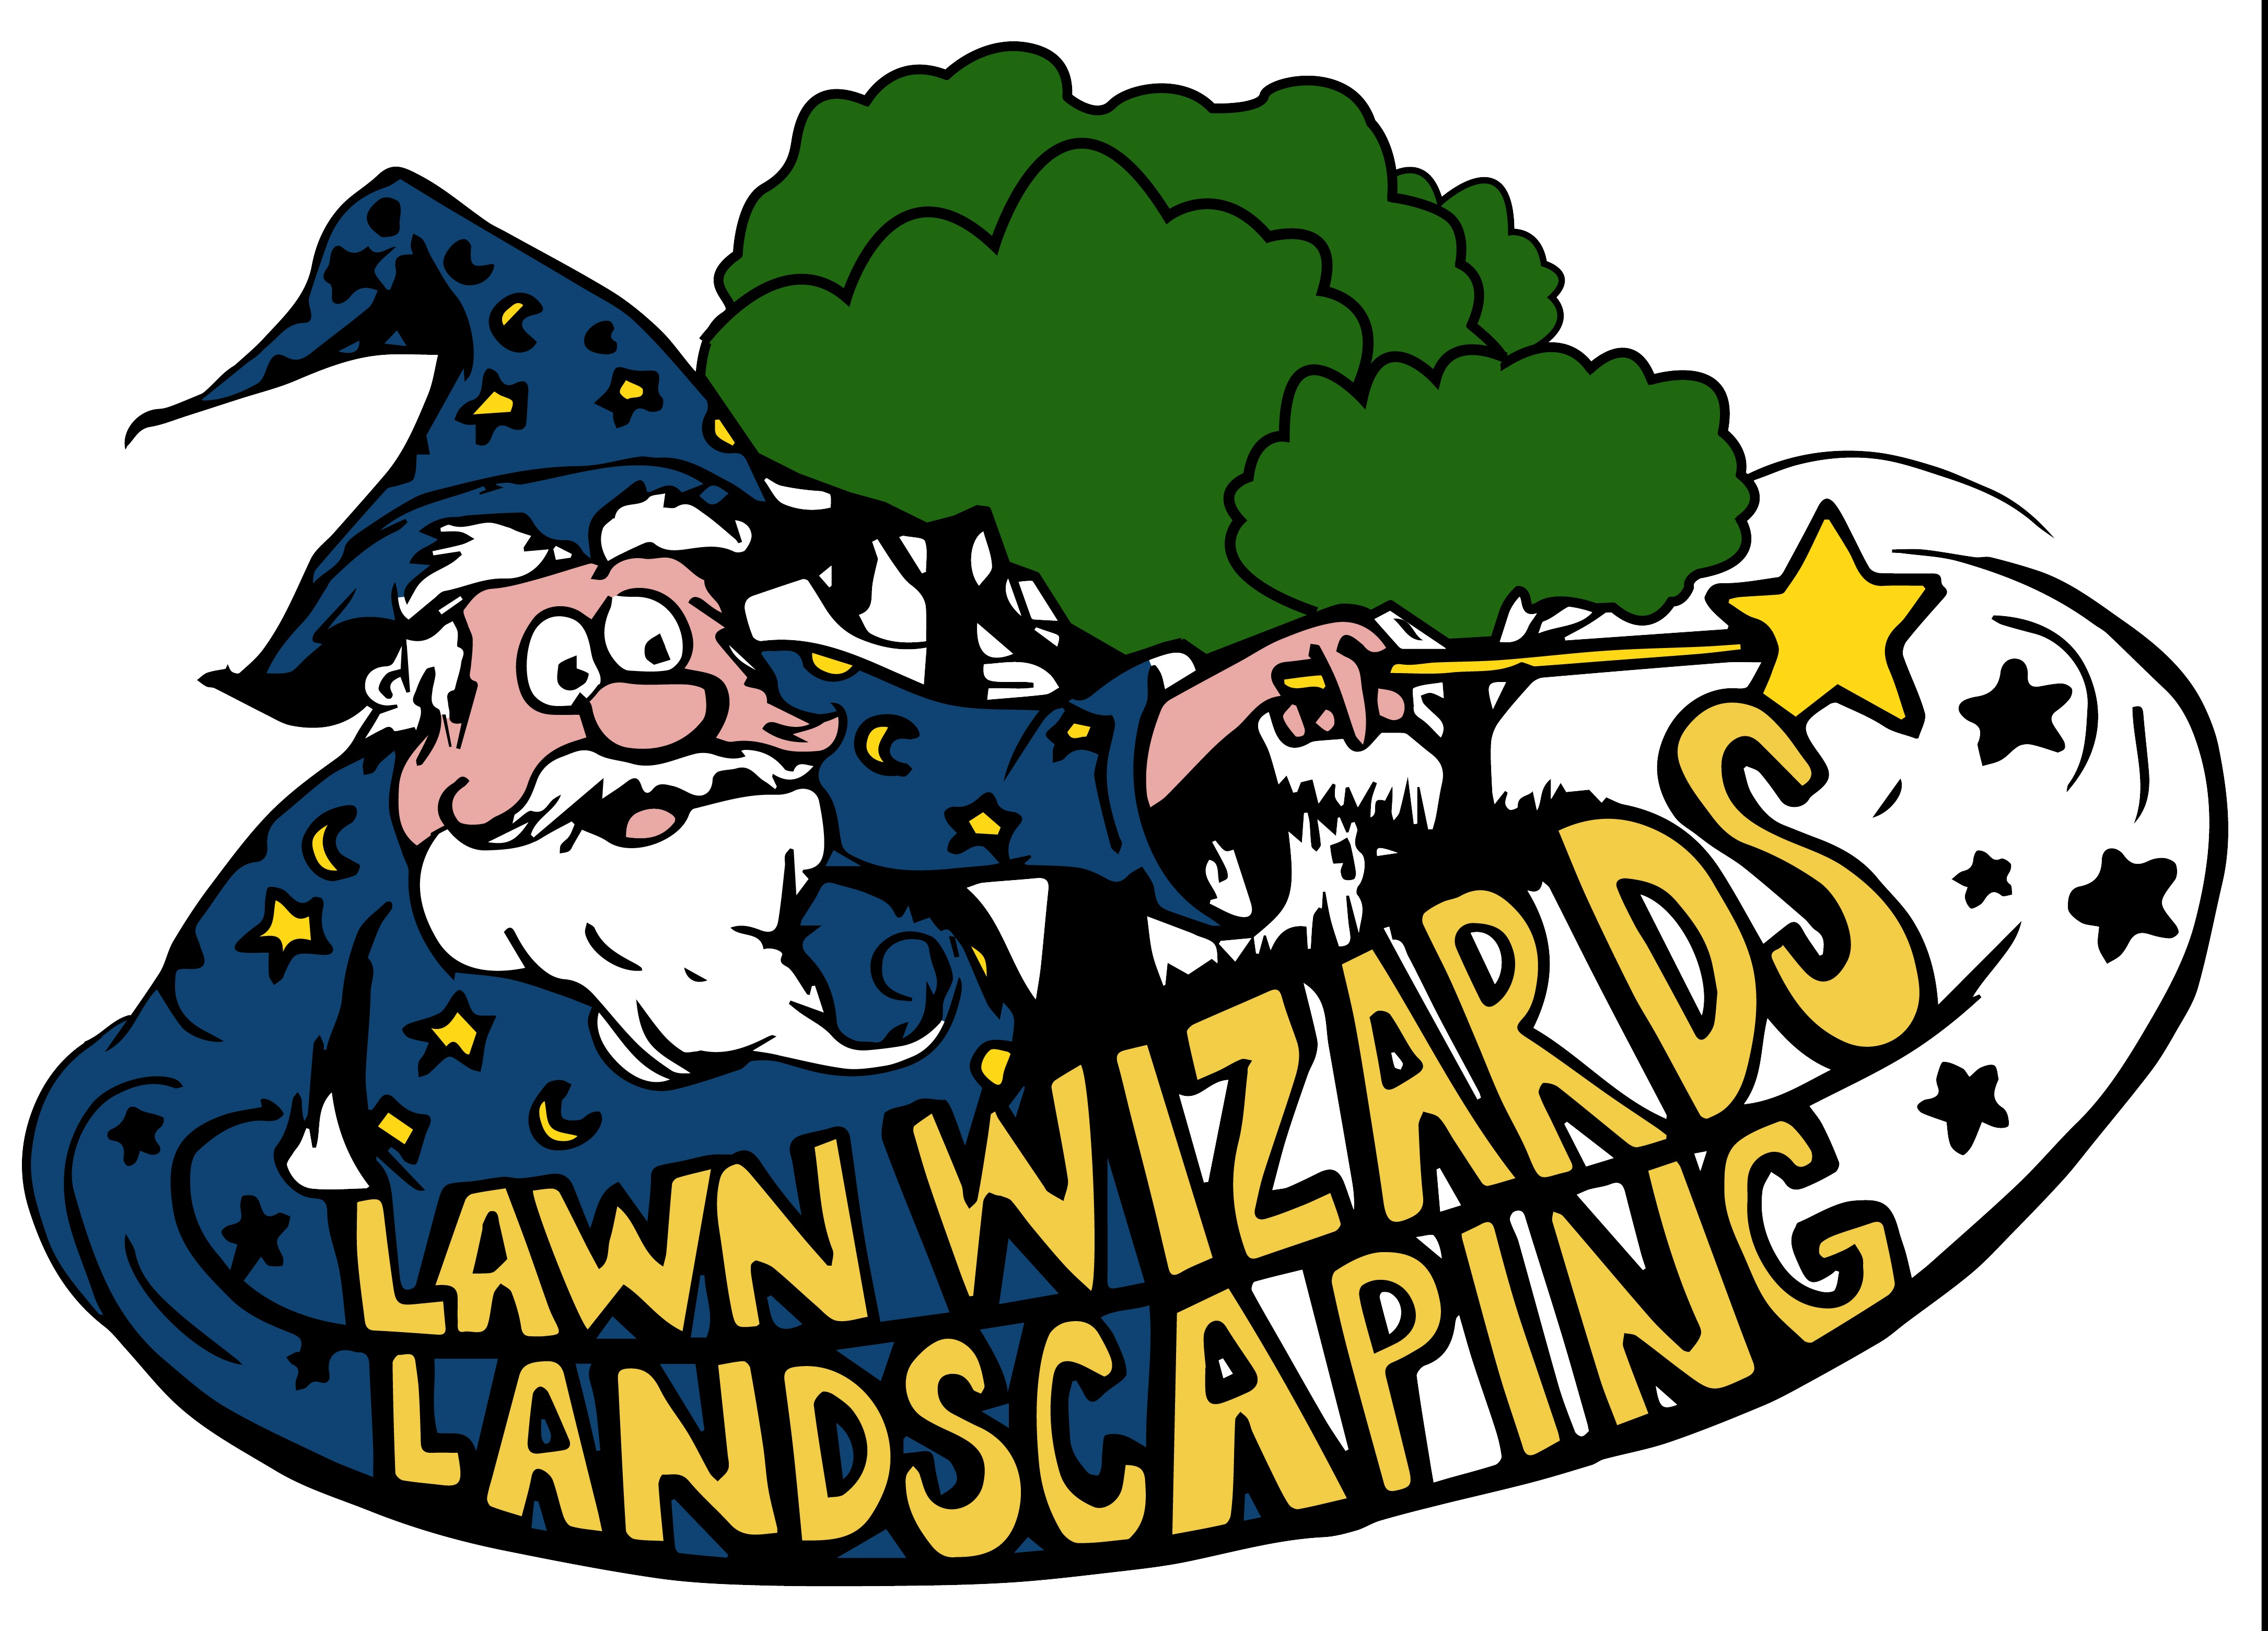 The Lawn Wizards Landscaping Logo